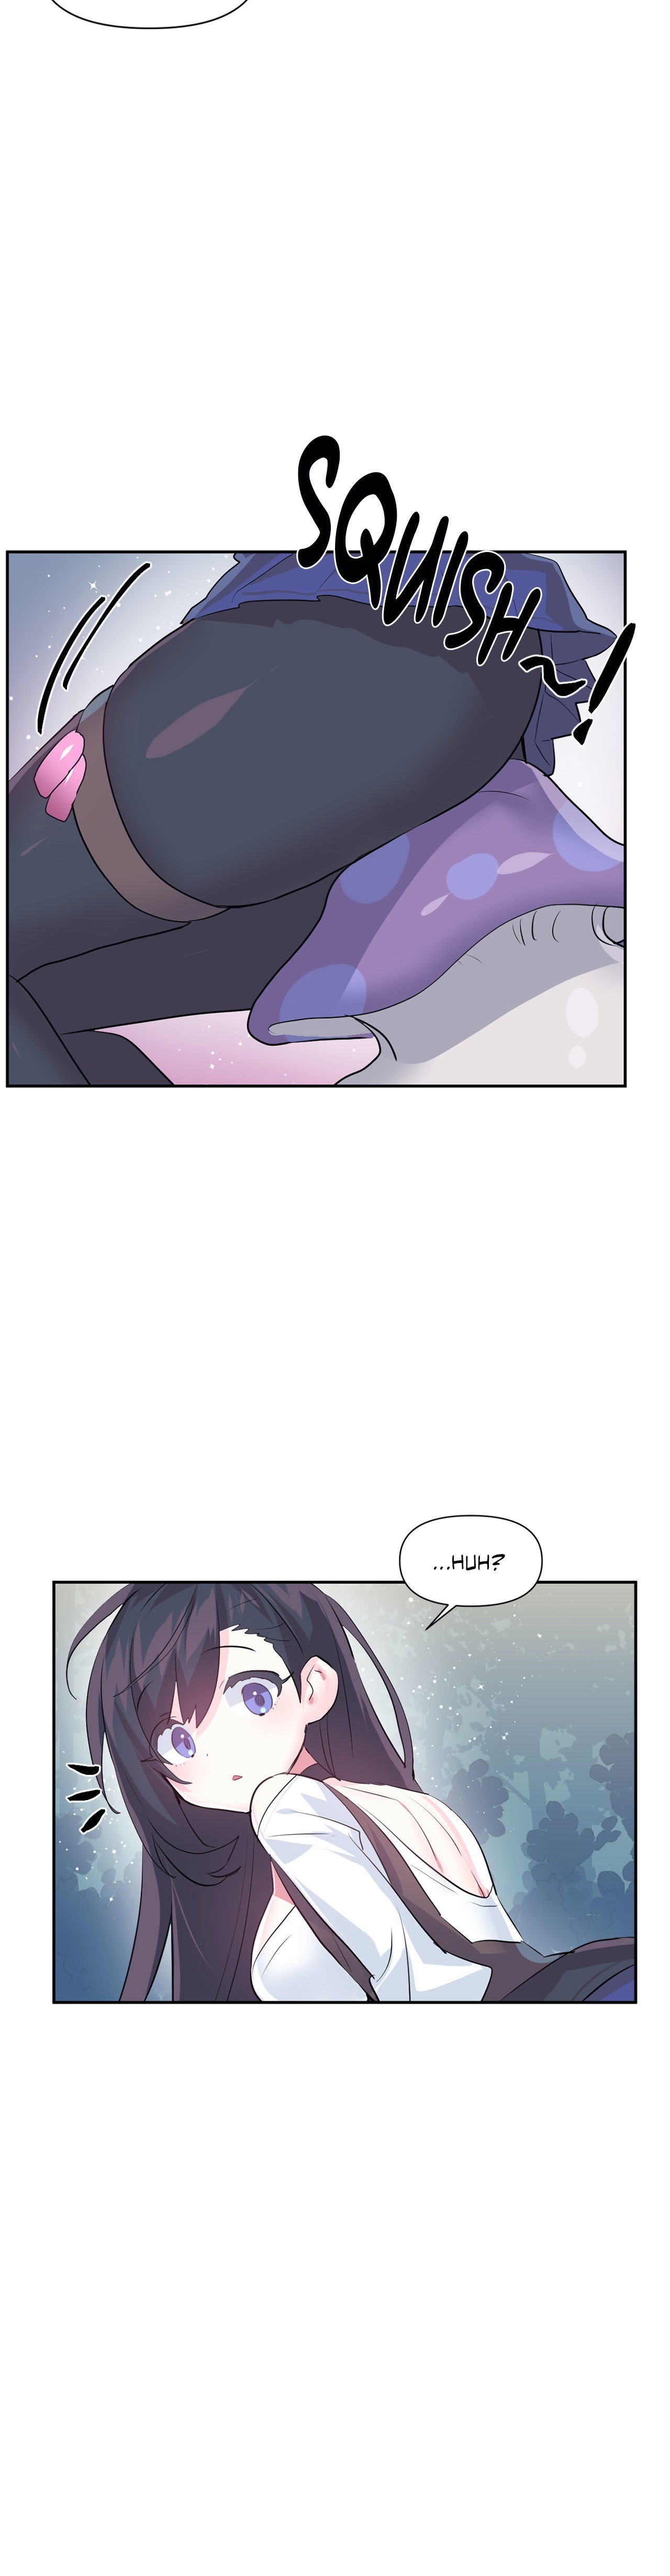 log-in-to-lust-a-land-chap-37-21